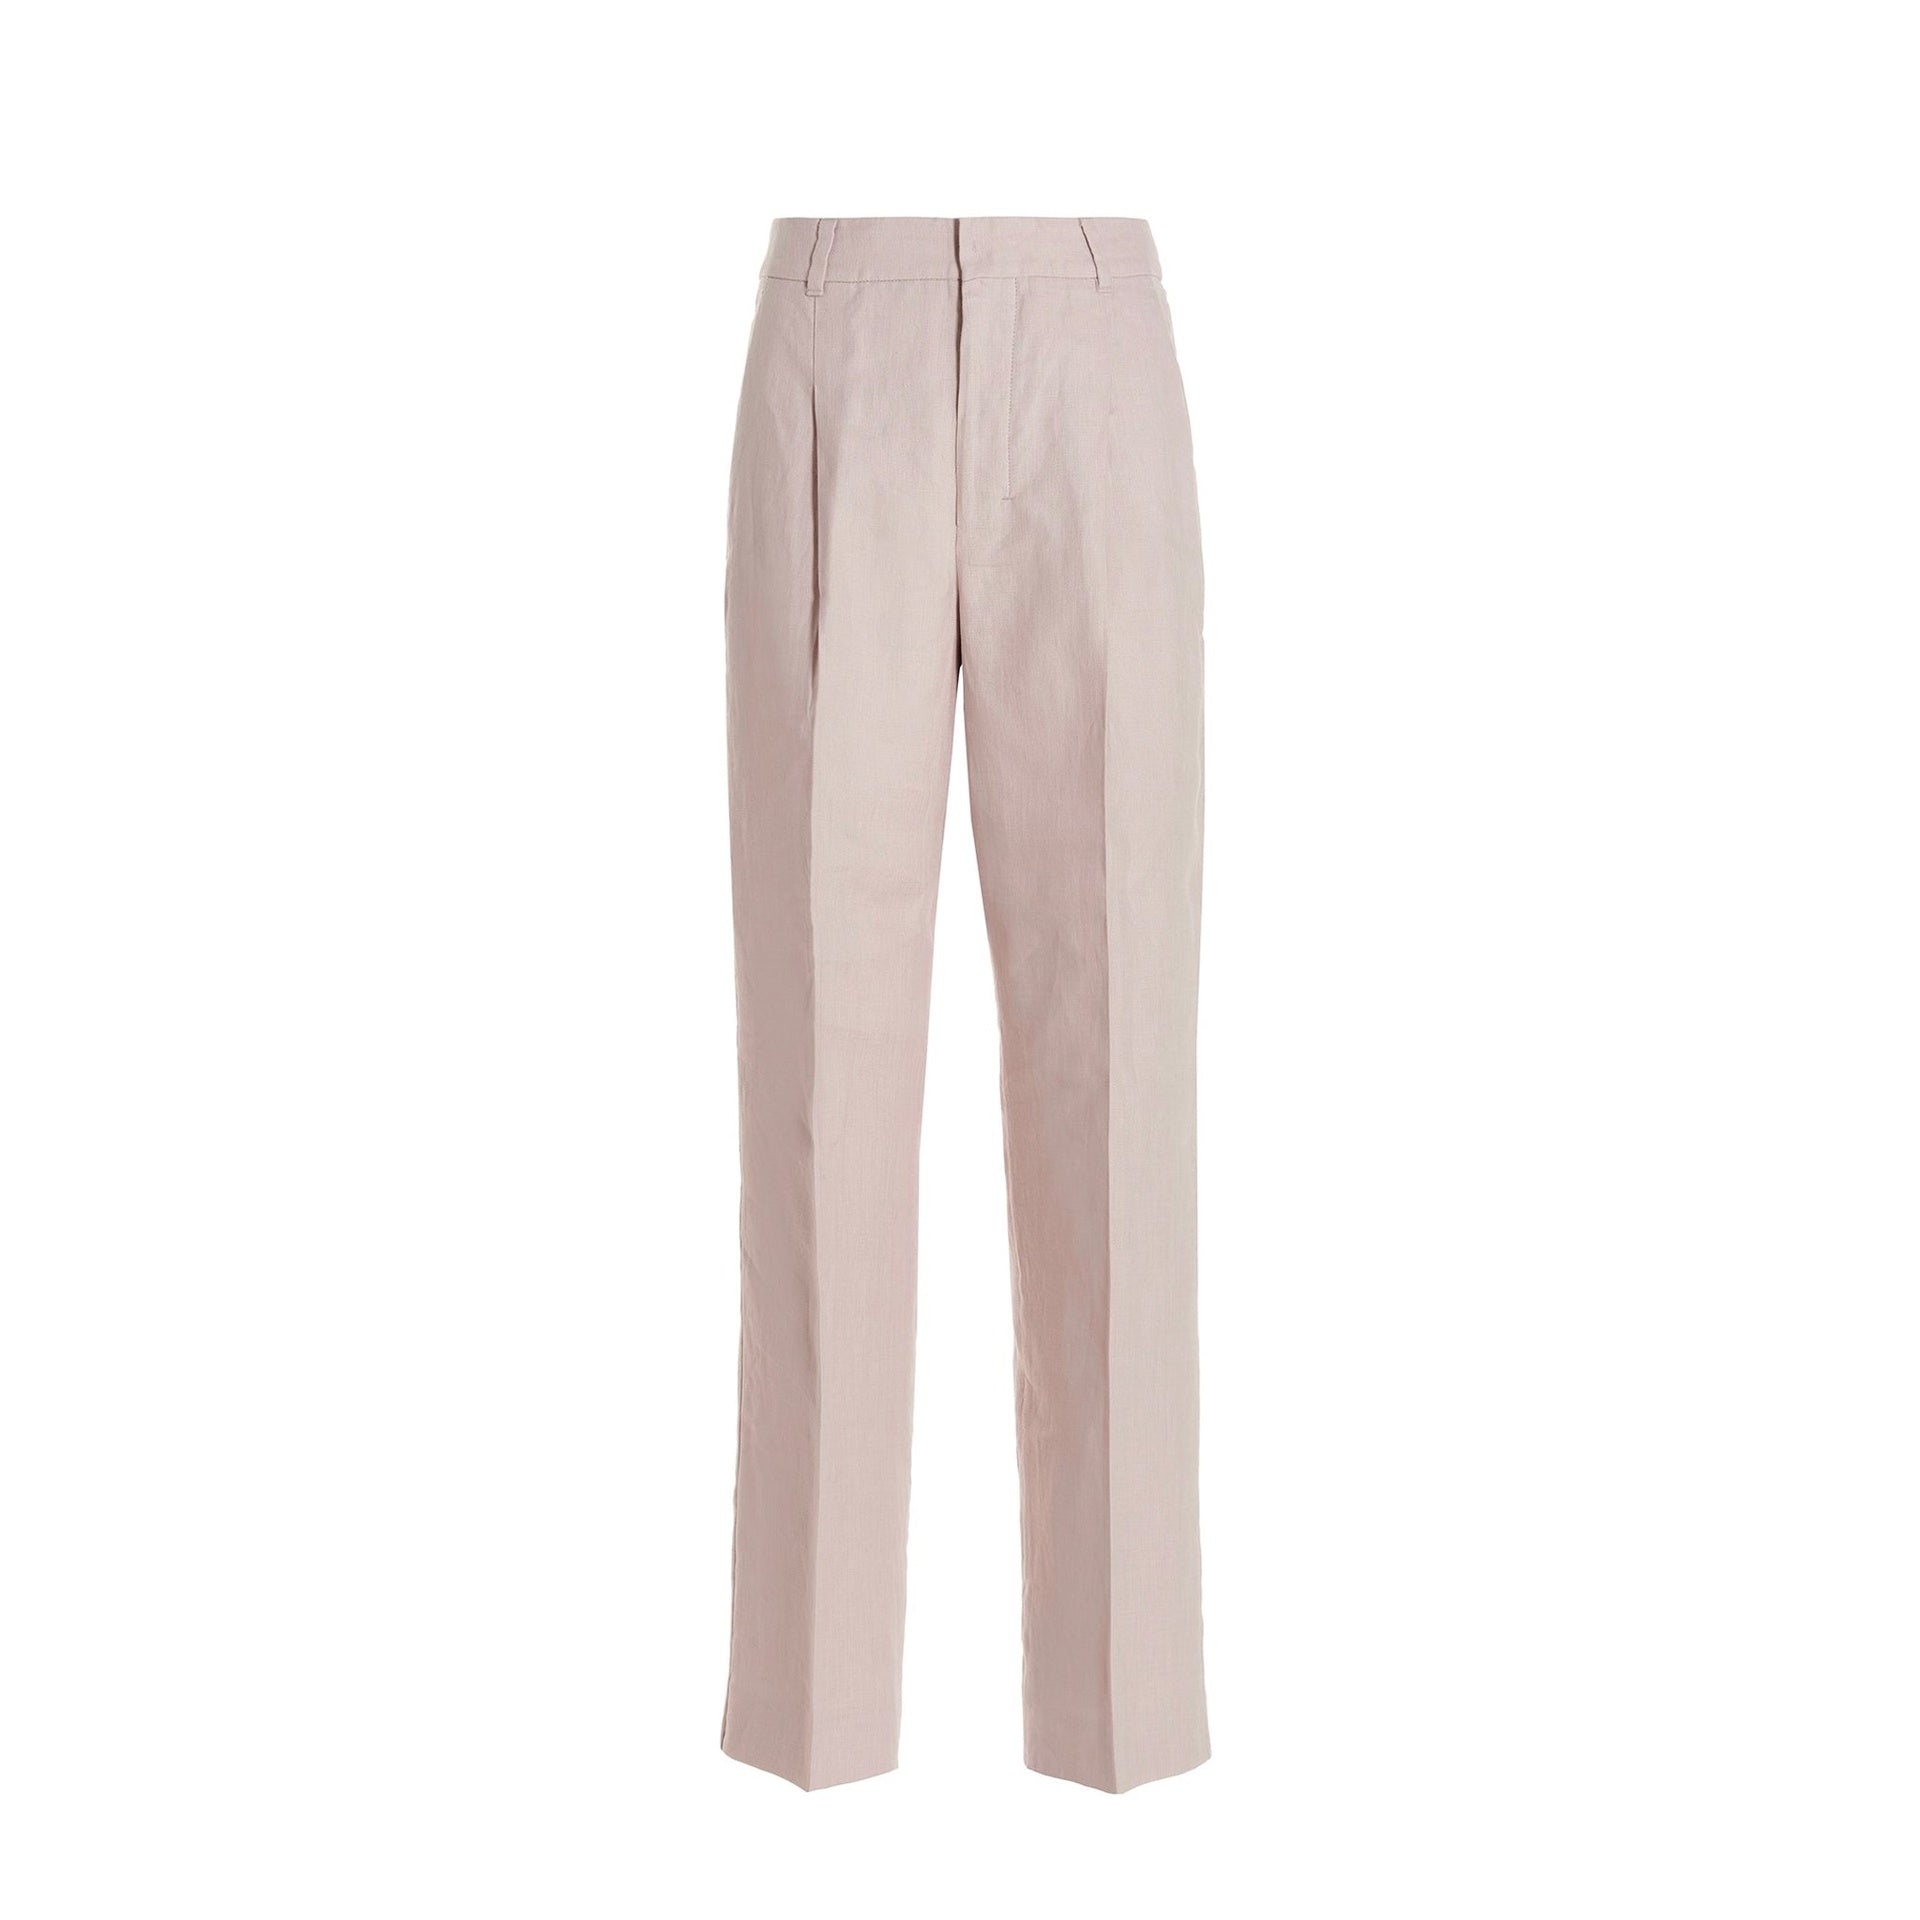 S-MAX-MARA-OUTLET-SALE-s-Max-Mara-Carina-Linen-Pants-Hosen-PINK-42-ARCHIVE-COLLECTION.jpg